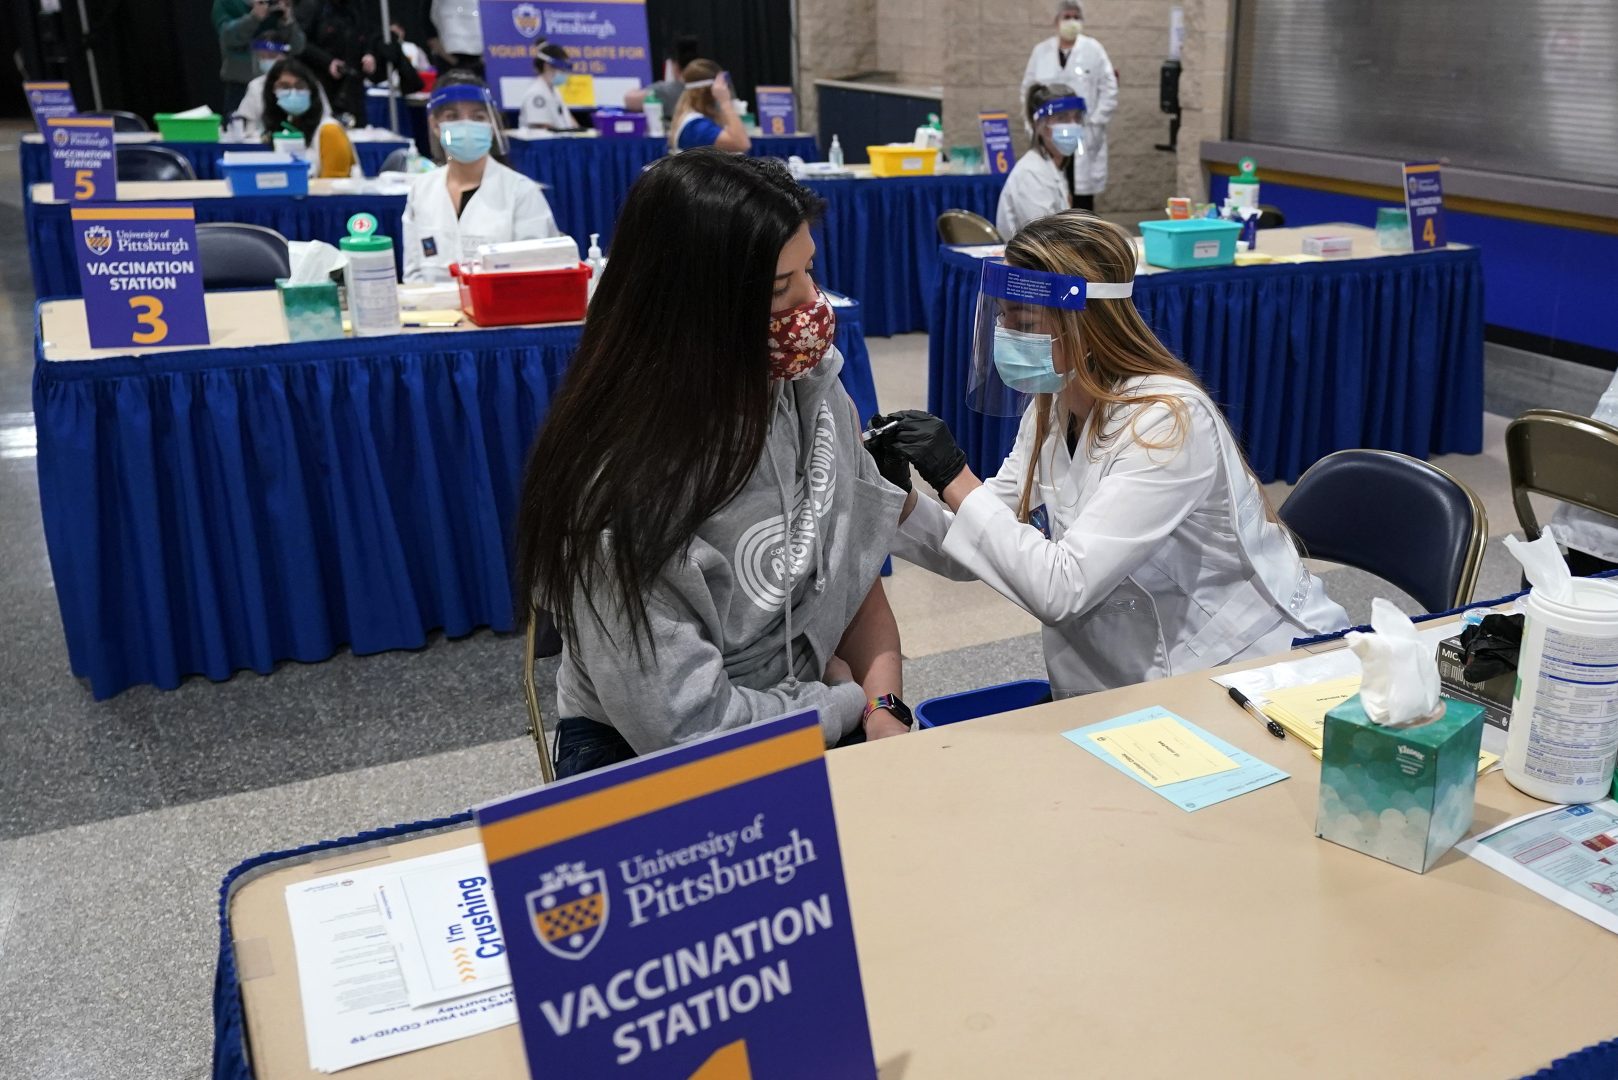 Tiffany Husak, left, a nursing student at the Community College of Allegheny County, receives her first dose of the Moderna COVID-19 Vaccine, during a vaccination clinic hosted by the University of Pittsburgh and the Allegheny County Health Department at the Petersen Events Center, in Pittsburgh, Thursday, Jan. 28, 2021. The clinic, staffed by Pitt faculty and students from Pharmacy, Nursing, Medicine, and Health and Rehabilitation Sciences, will vaccinate some 800 personnel, over two days, who are work in healthcare roles, including students from Chatham College, Community College of Allegheny County, Duquesne University, LaRoche University, Pittsburgh Technical College and Pitt who work with patients. (AP Photo/Gene J. Puskar)